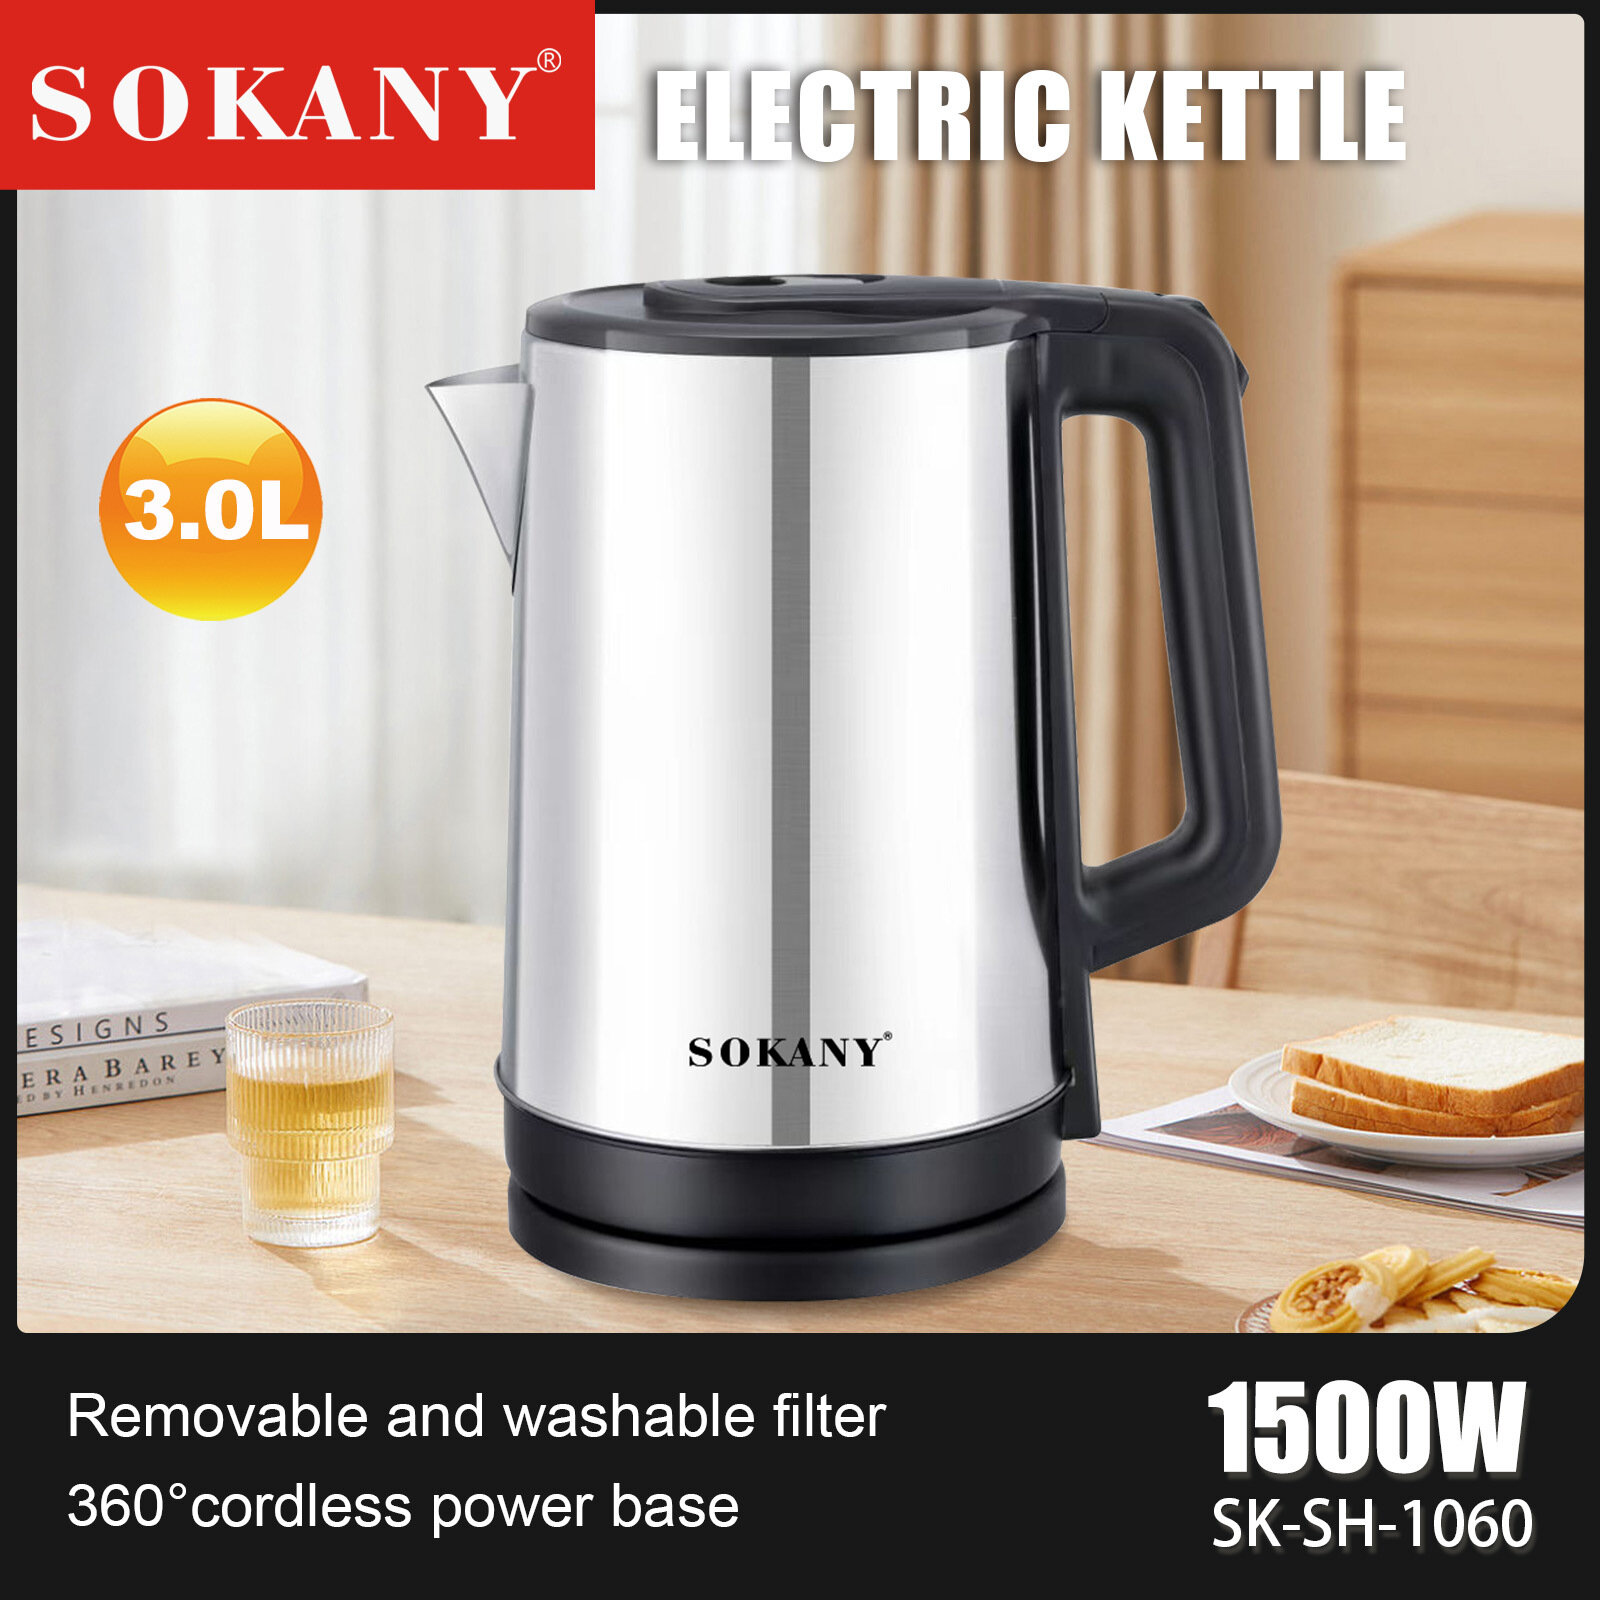 SOKANY 1060 Electric Kettle 3L Household Automatic Power Off Stainless Steel Kettle